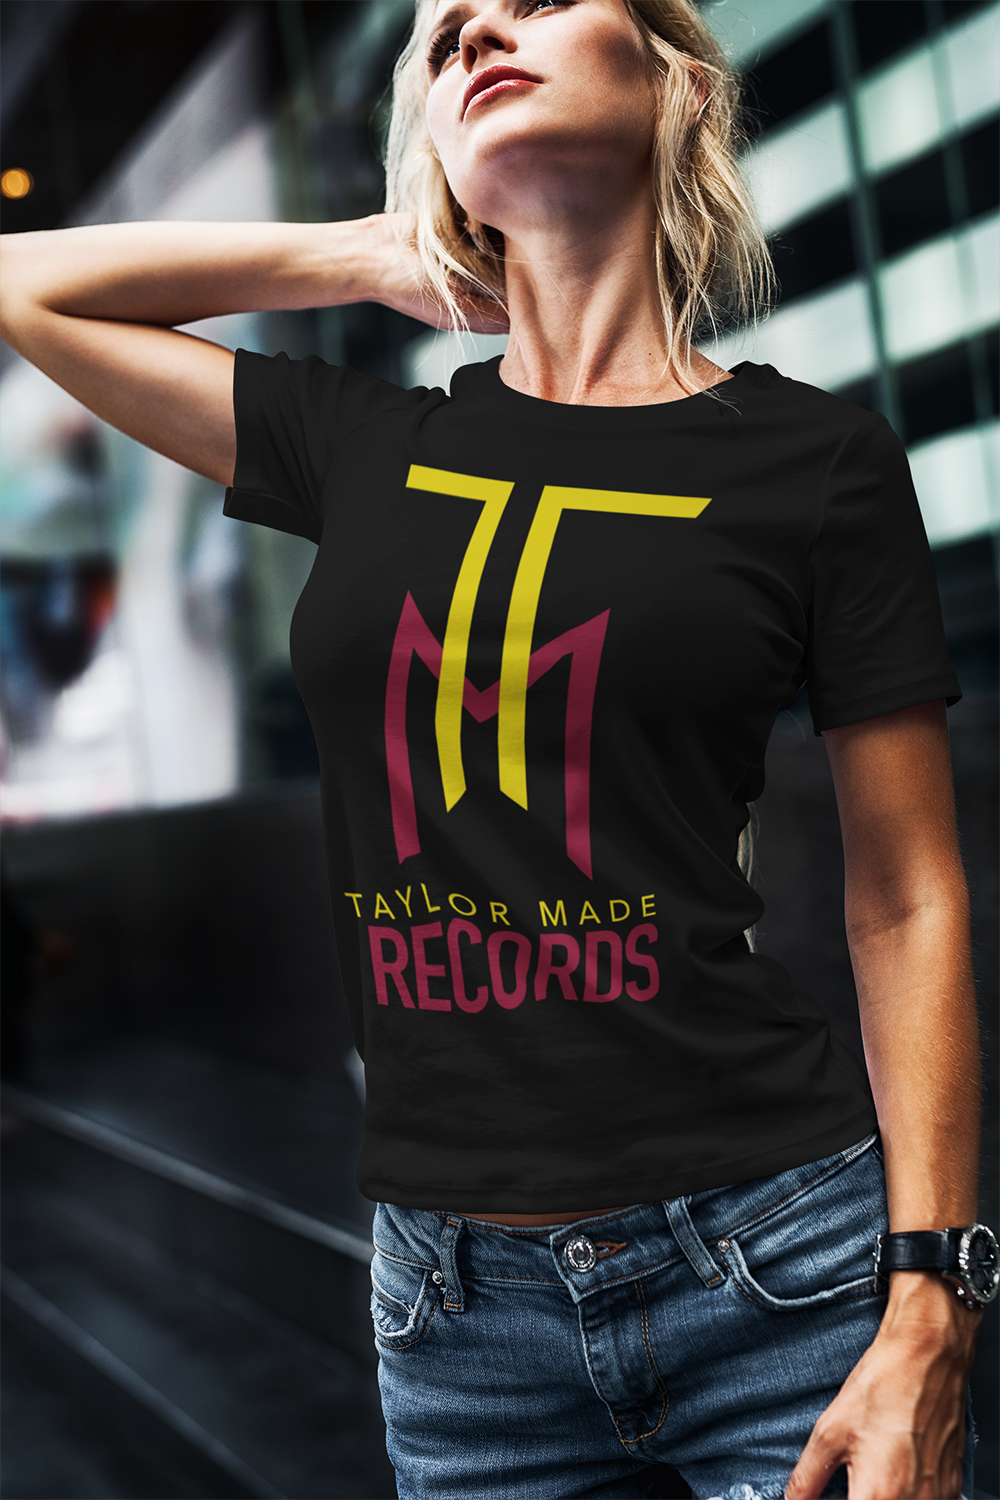 t-shirt-mockup-featuring-a-woman-posing-on-a-city-street-2236-el1.png